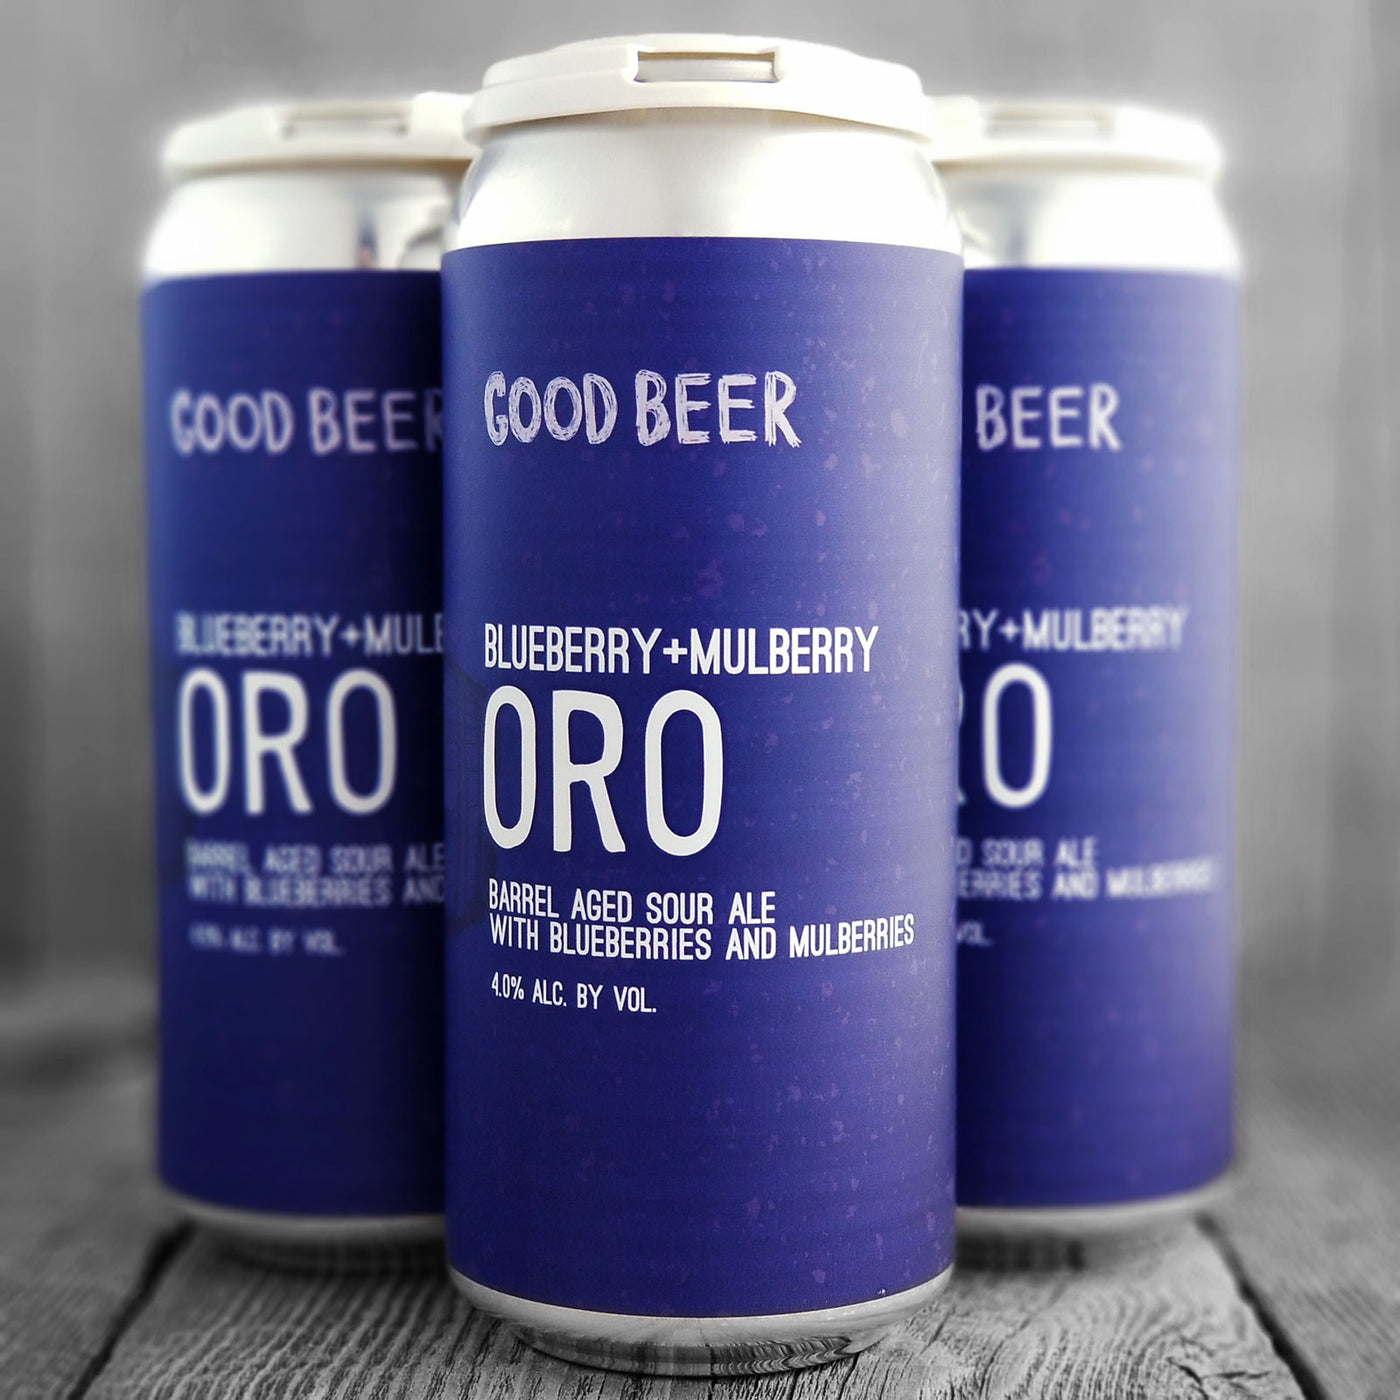 The Good Beer Blueberry + Mulberry Oro